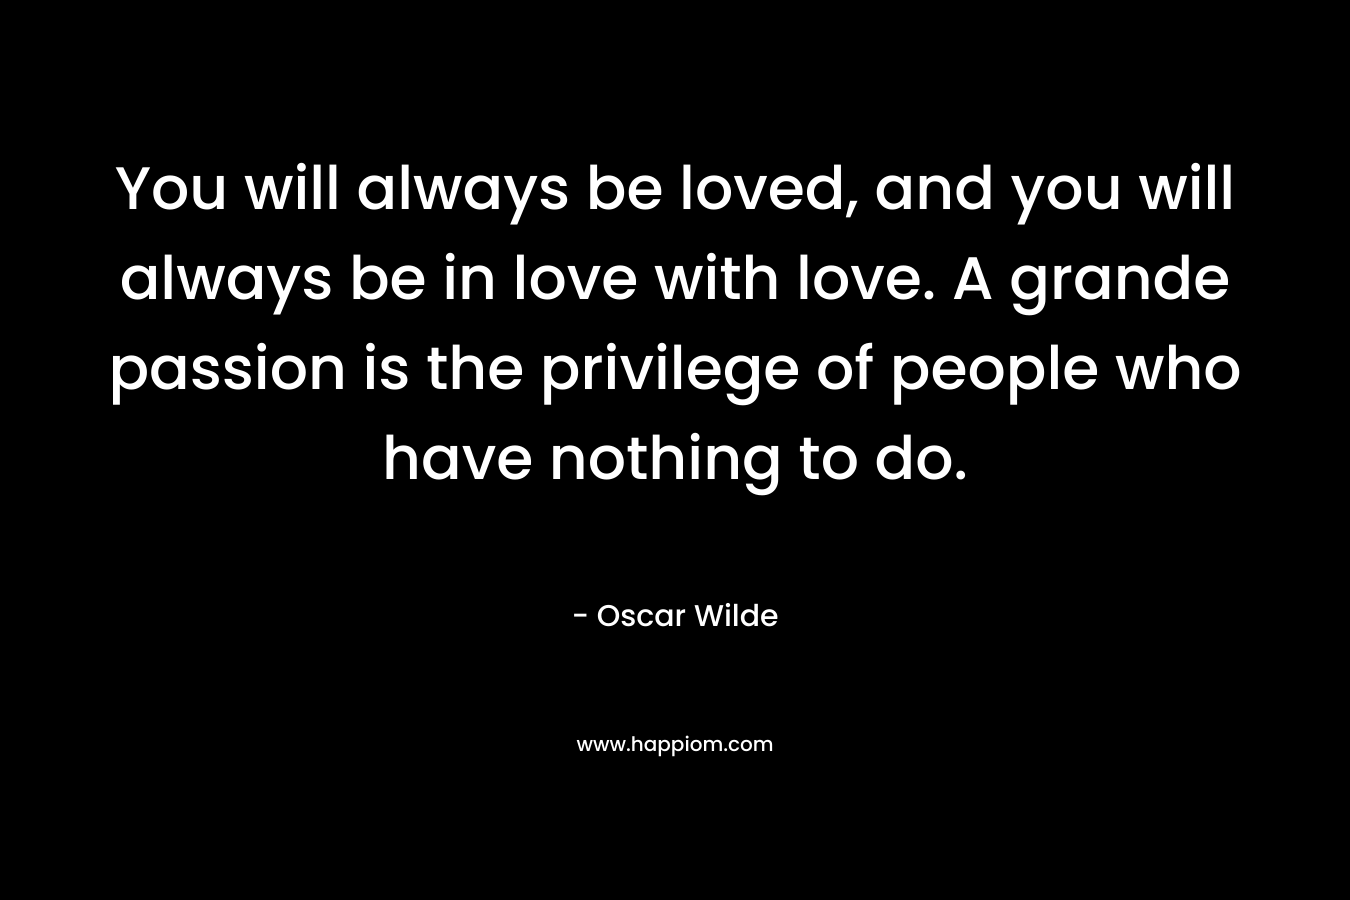 You will always be loved, and you will always be in love with love. A grande passion is the privilege of people who have nothing to do.